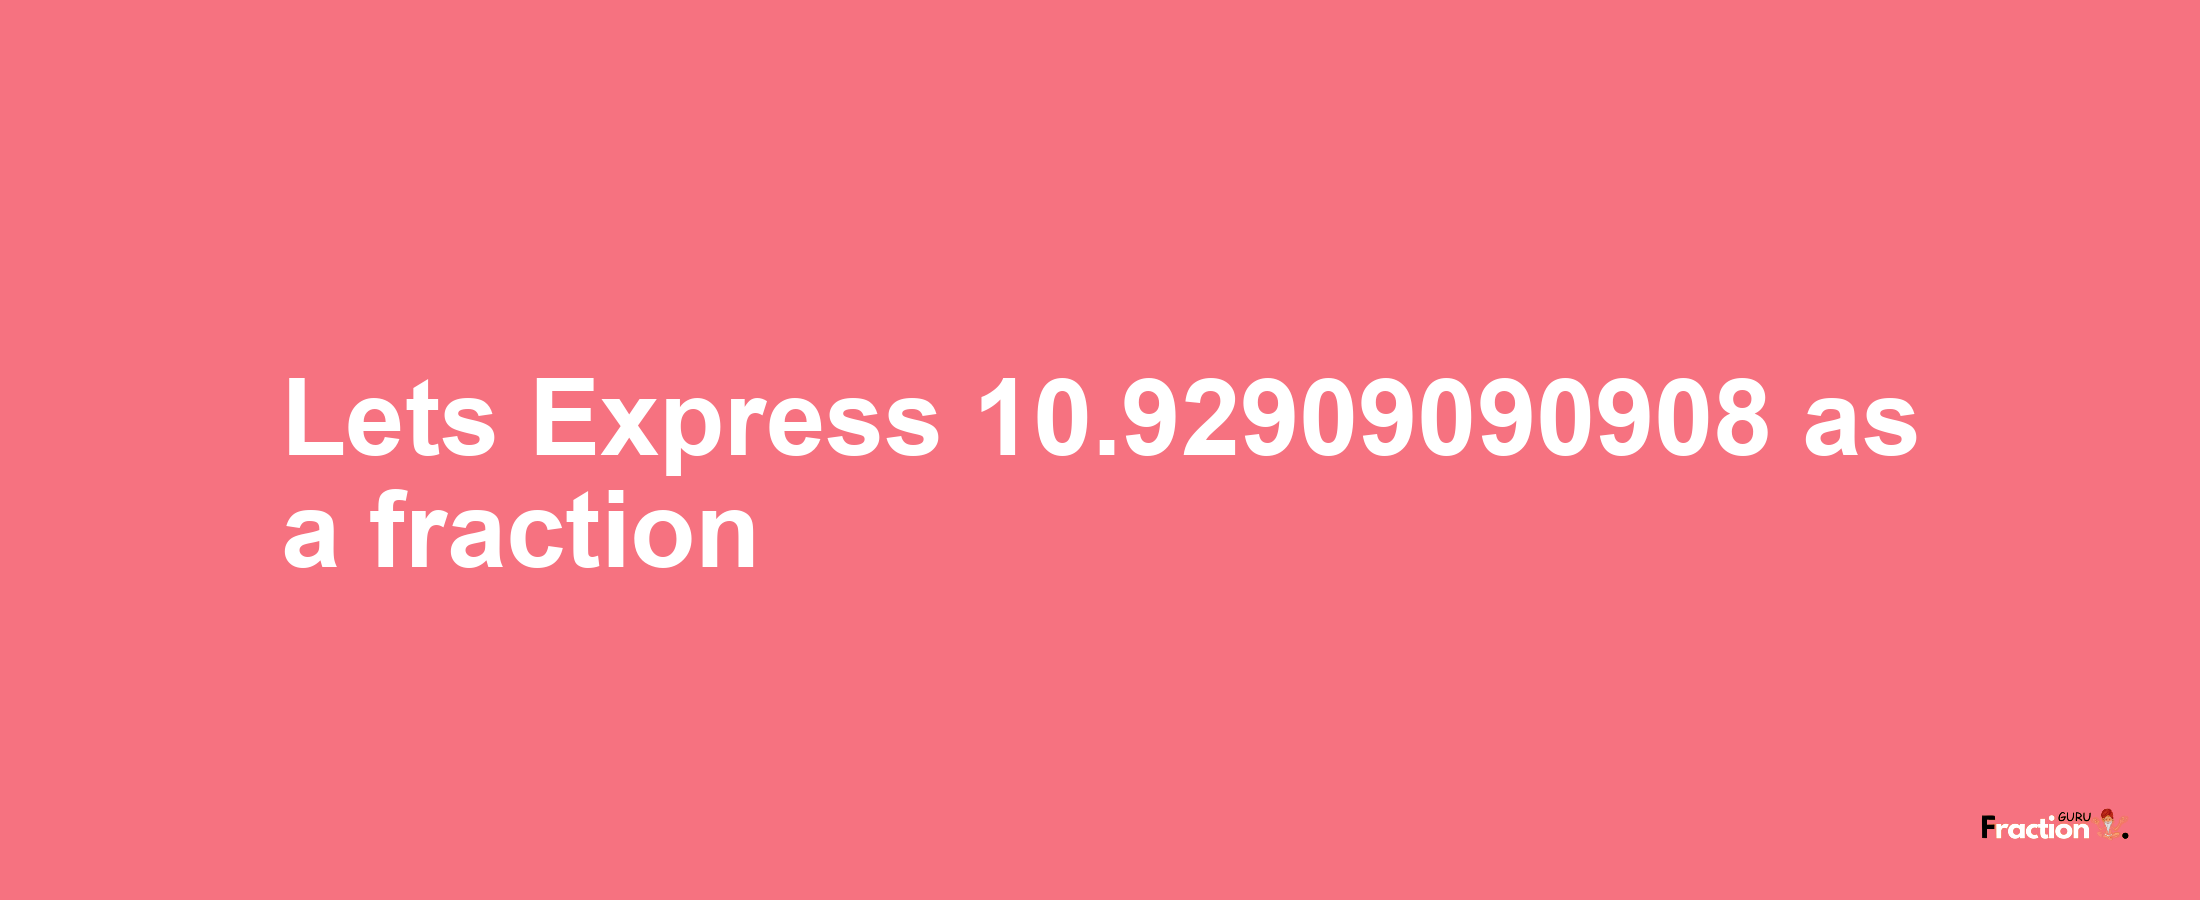 Lets Express 10.92909090908 as afraction